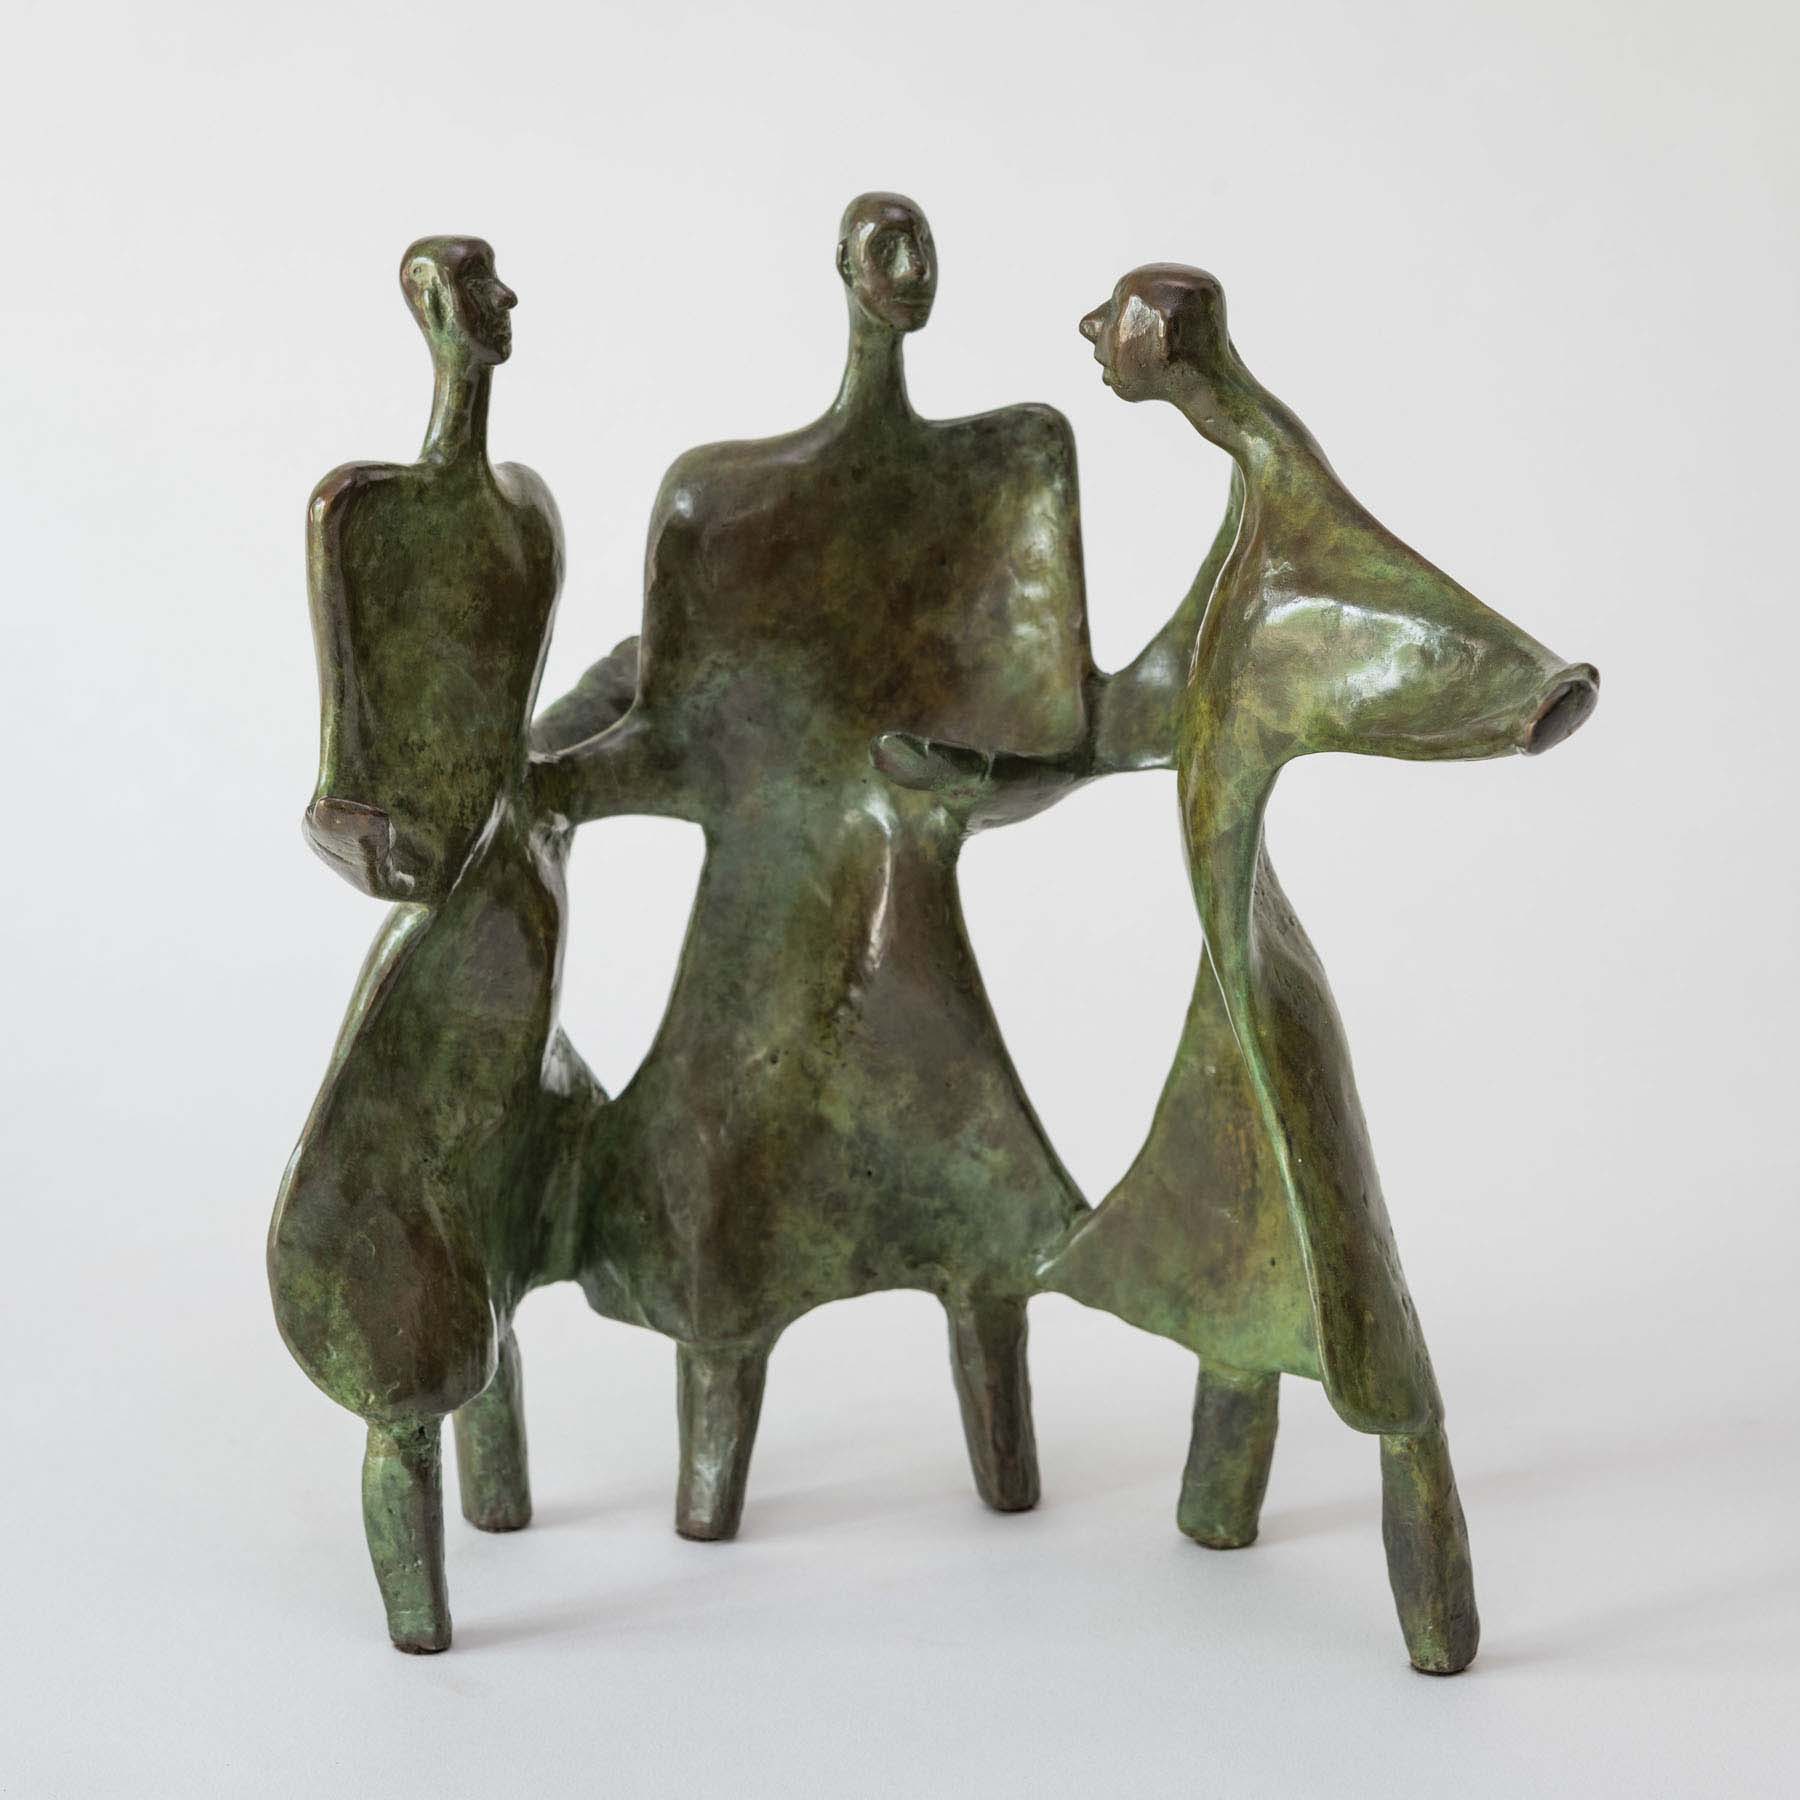 A bronze sculpture of three, abstract human figures all connected and standing in a semi-circle.